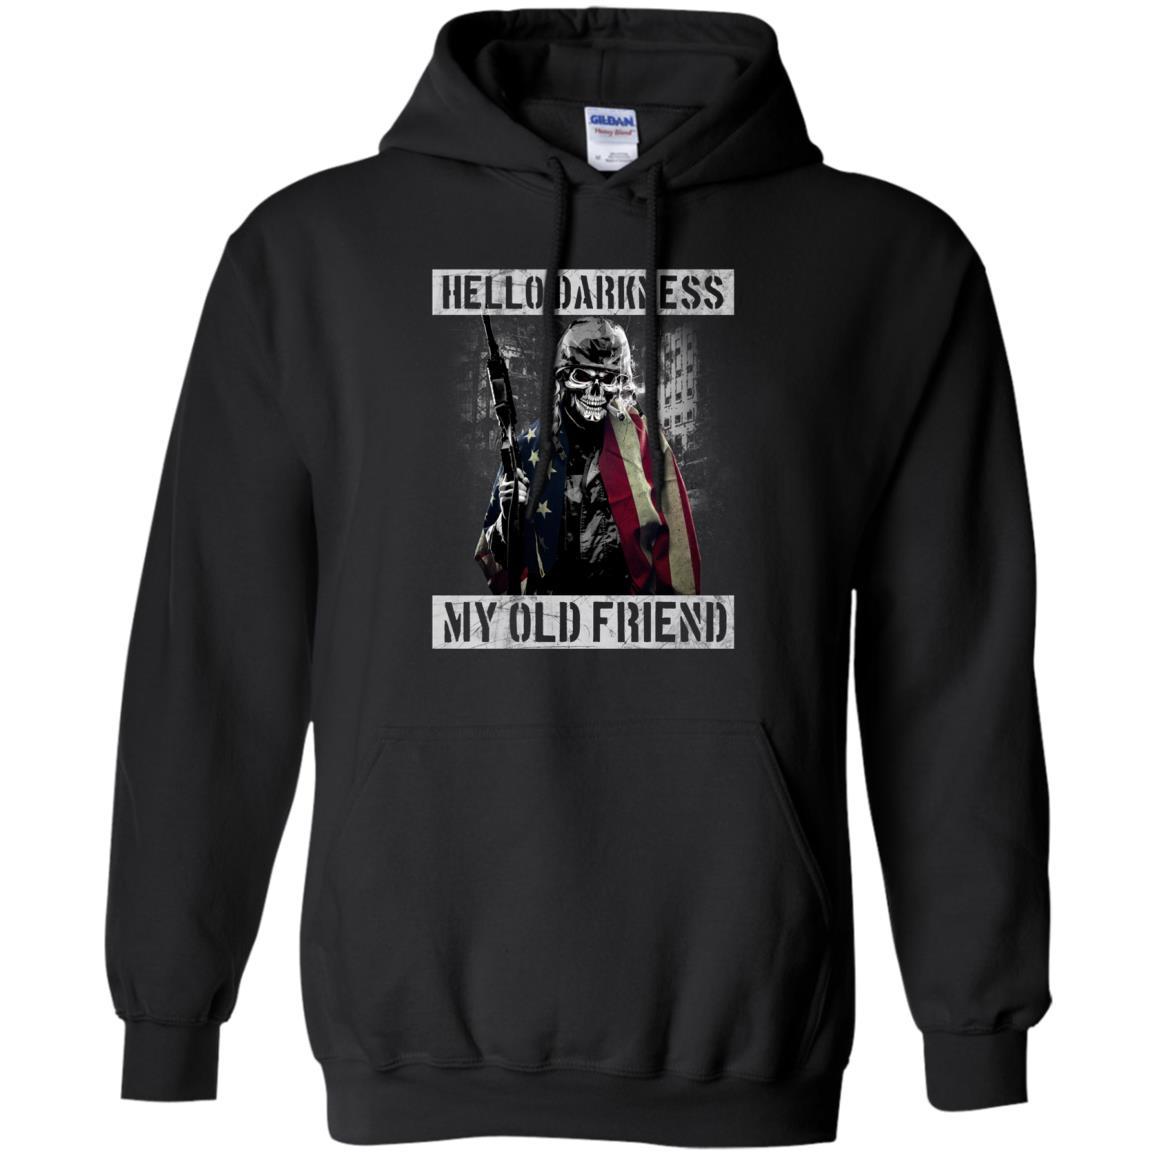 Military T-Shirt "Hello Darkness - My Old Friend Men On" Front-TShirt-General-Veterans Nation